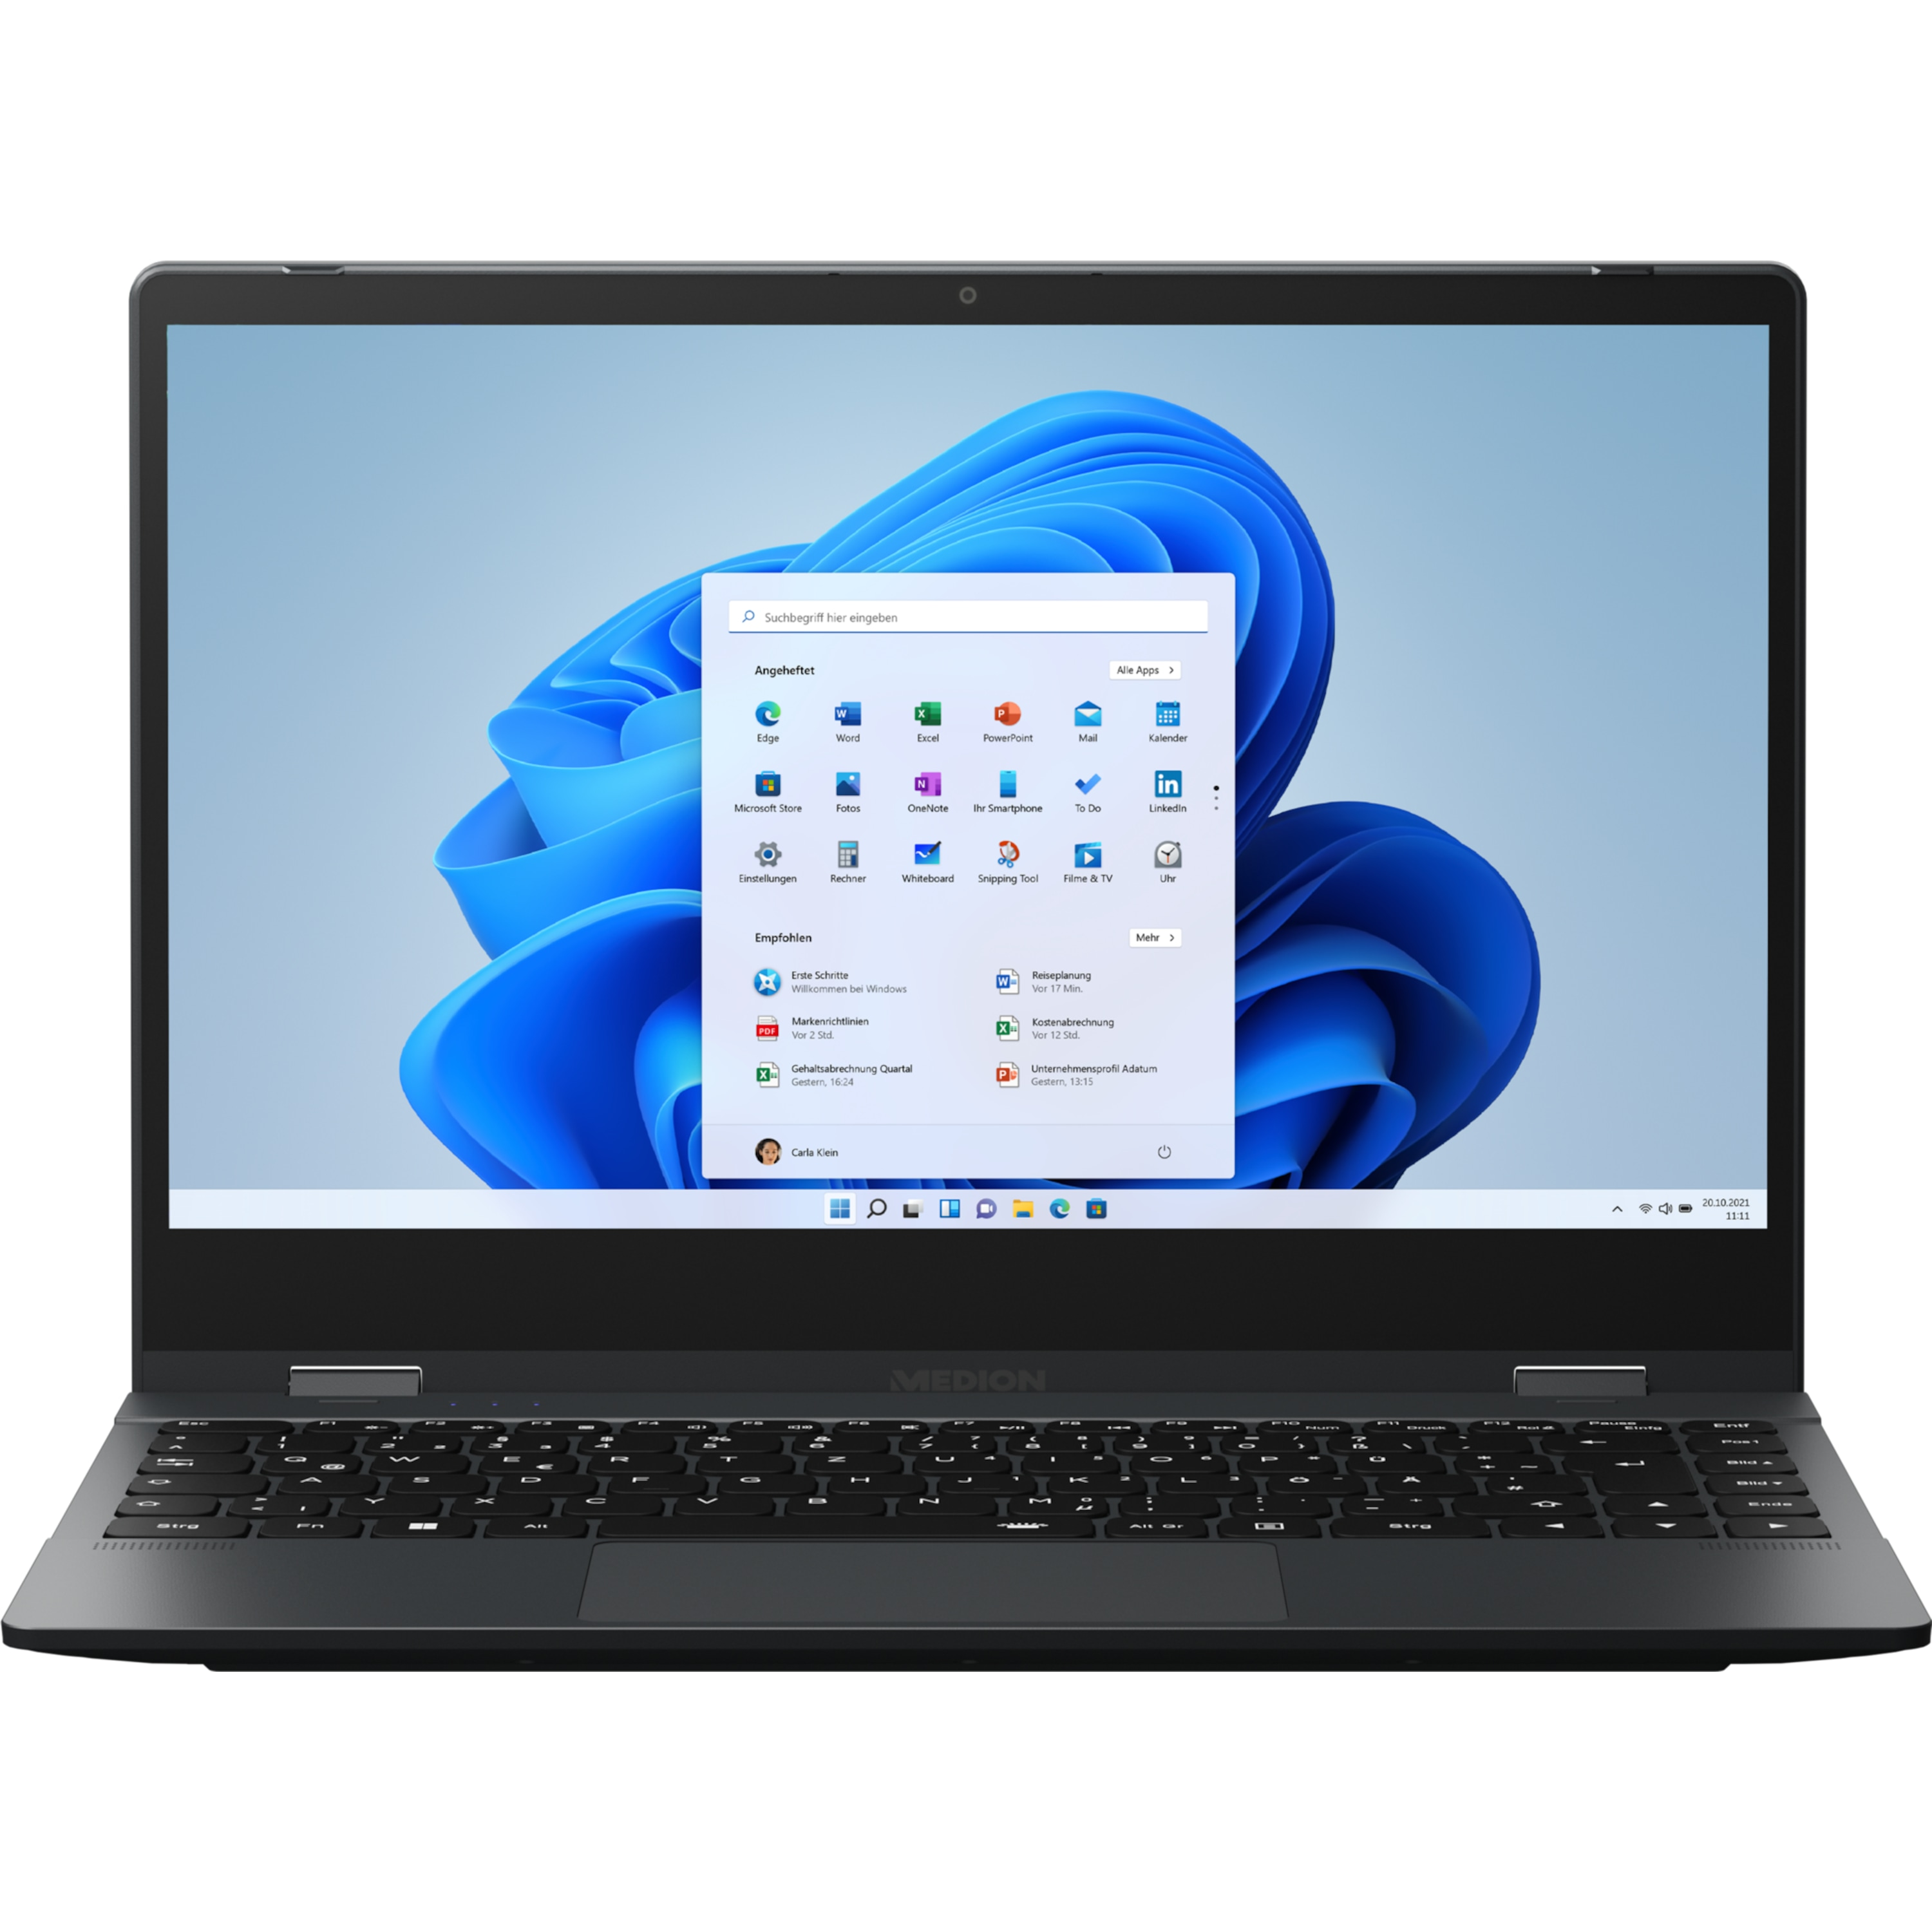 Convertible 14 Prozessor, blau Intel® Display, Touch 512 Core™ i3 Notebook Touchscreen, RAM, SSD, mit Zoll Display E14413 GB 8 GB MEDION